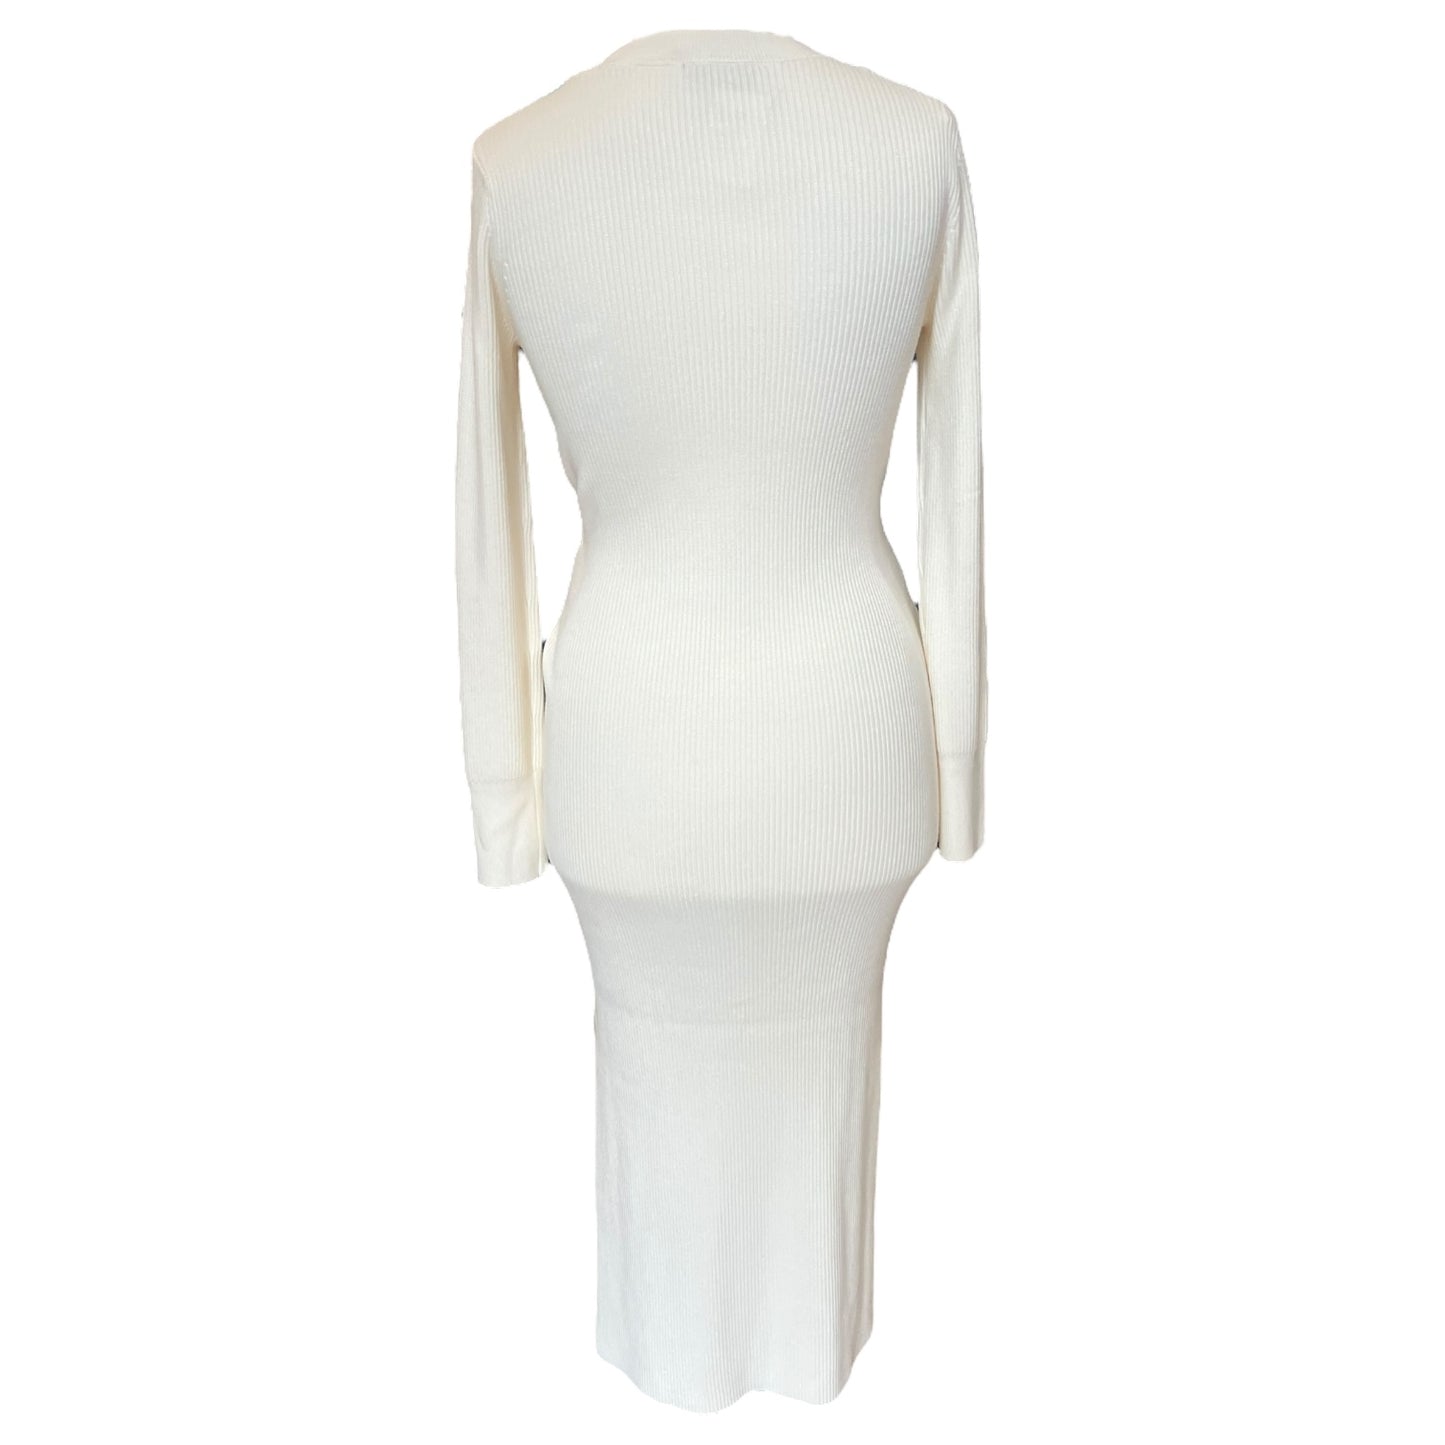 & Other Stories Cream Knit Dress